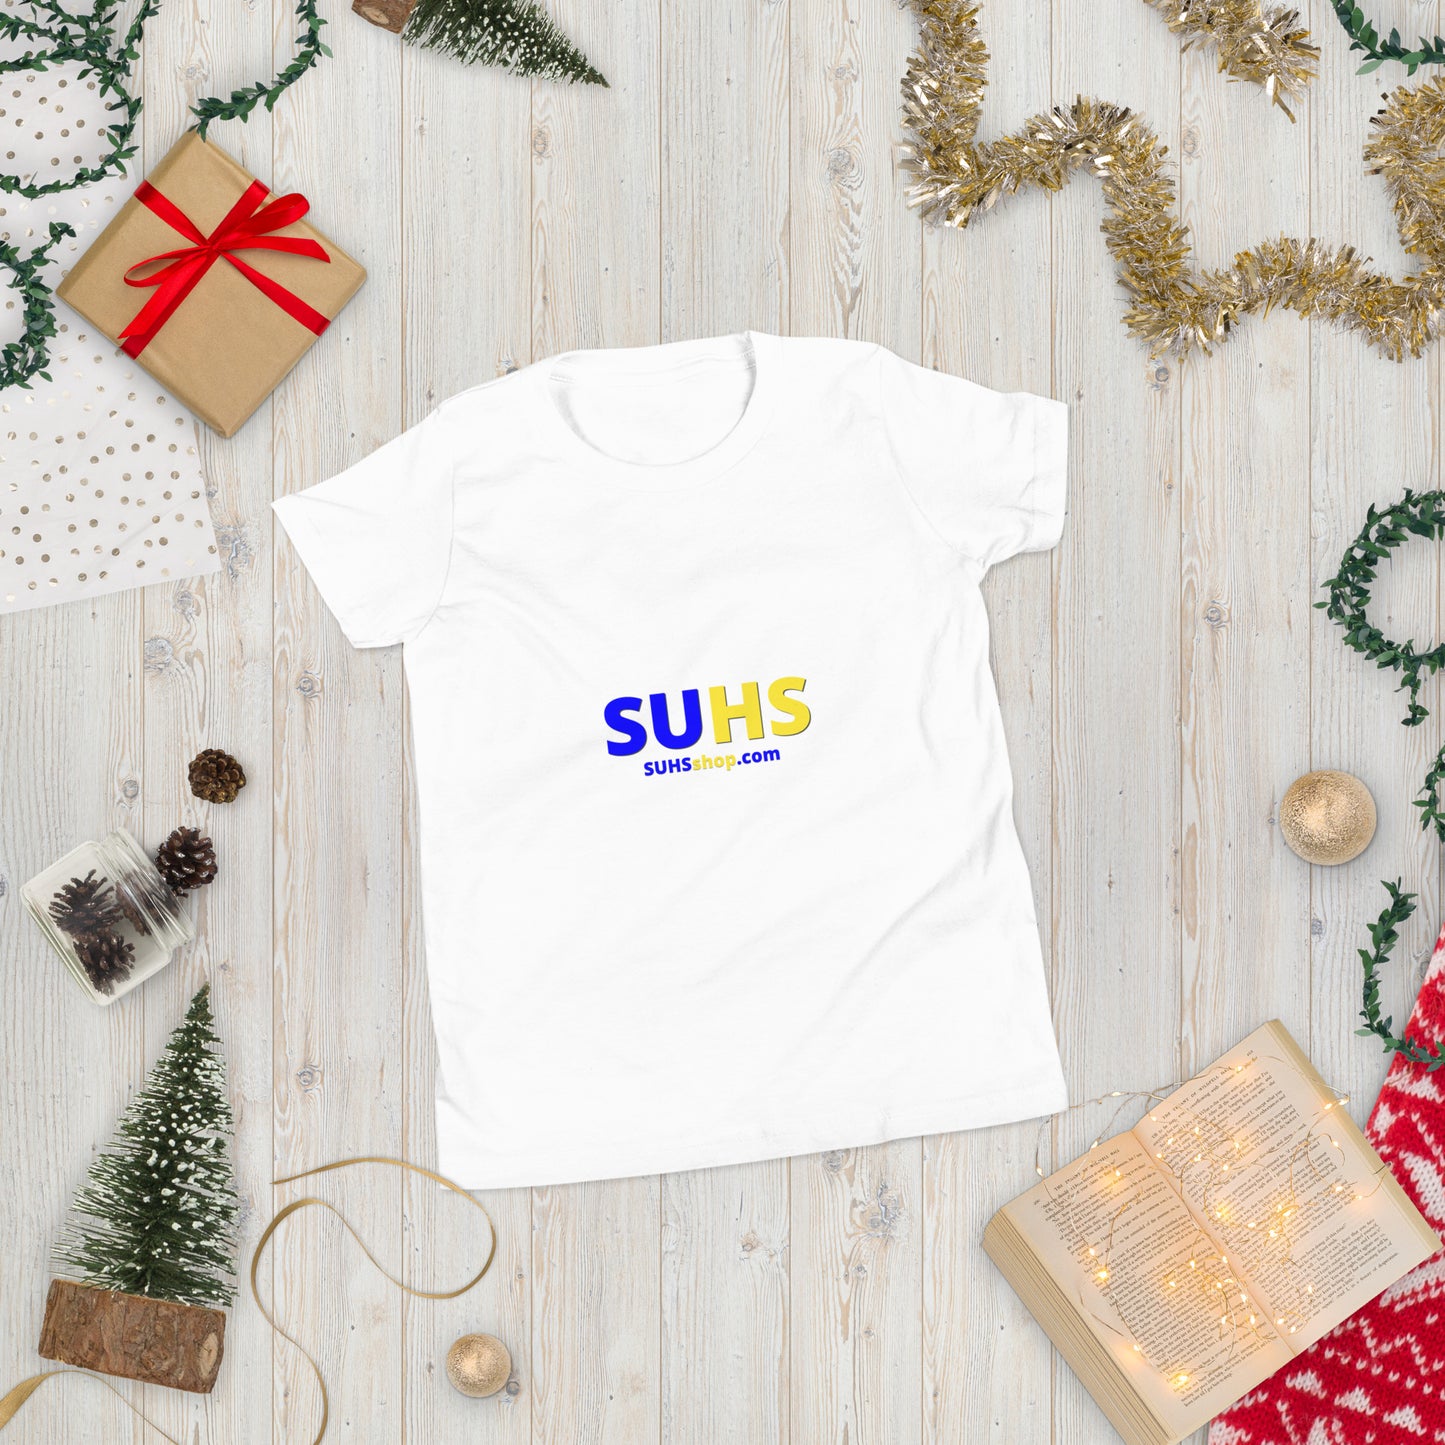 Youth Short Sleeve T-Shirt (personalized design)